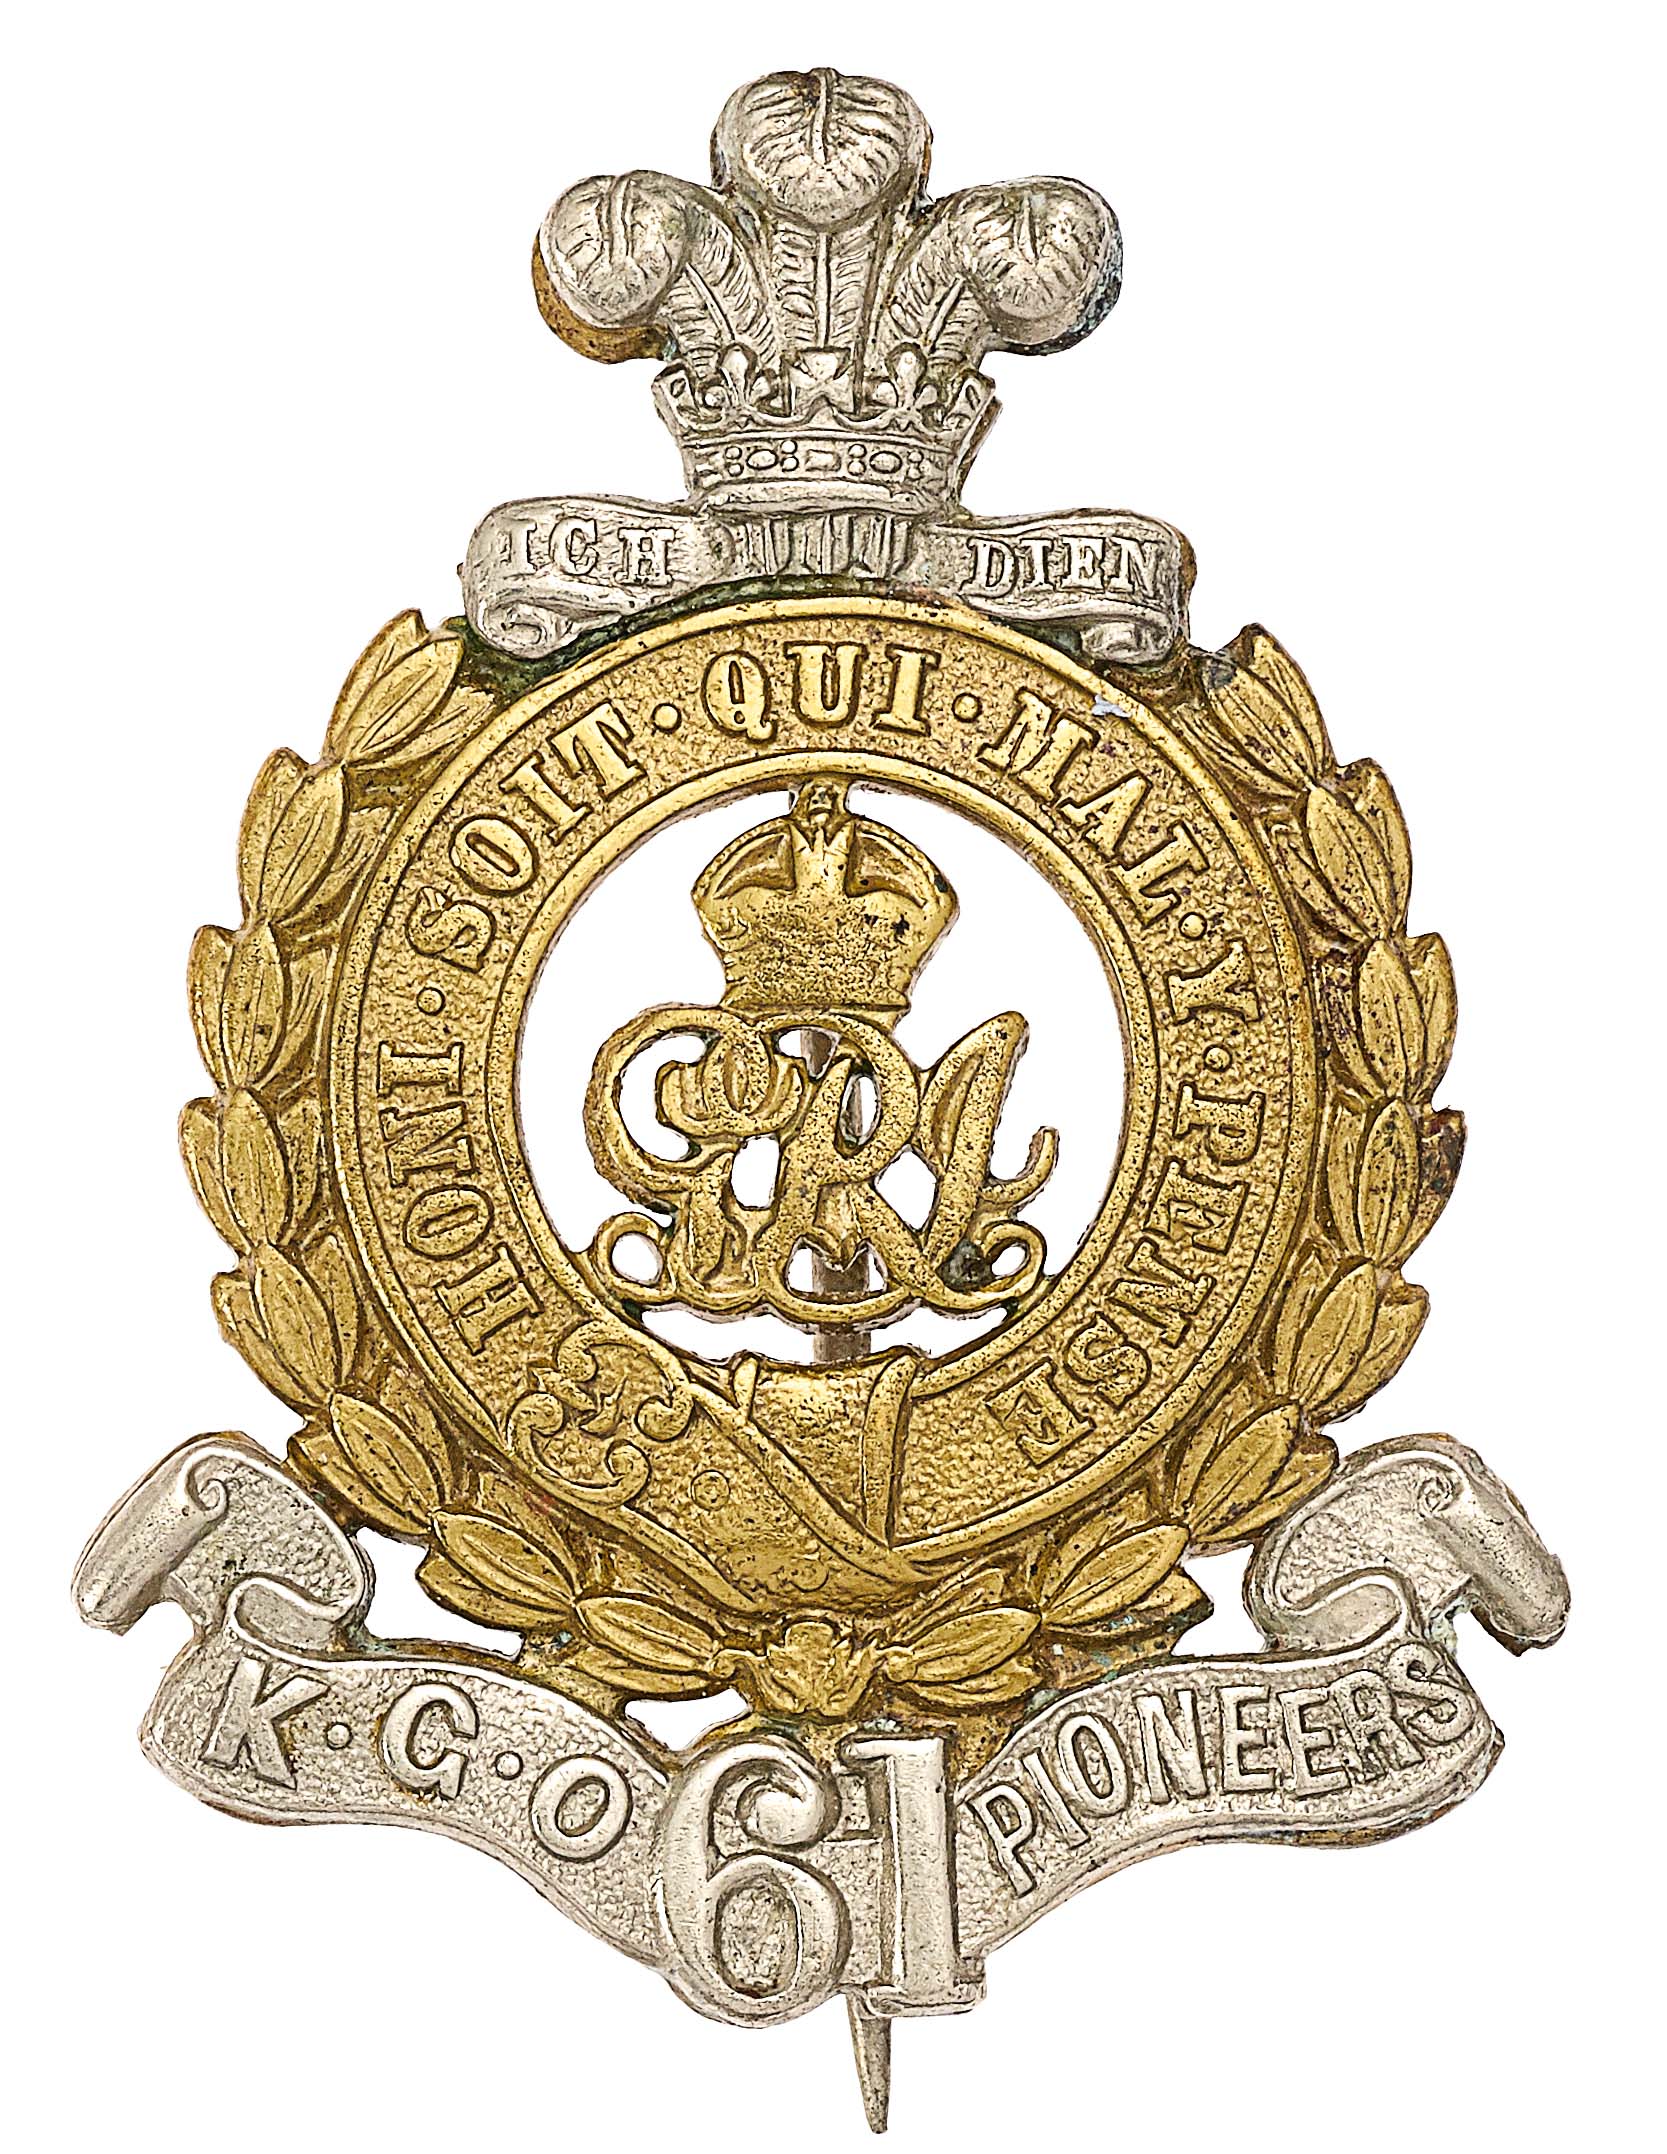 Indian Army. 61st King George’s Own Pioneers pagri badge circa 1911-22. - Image 2 of 2